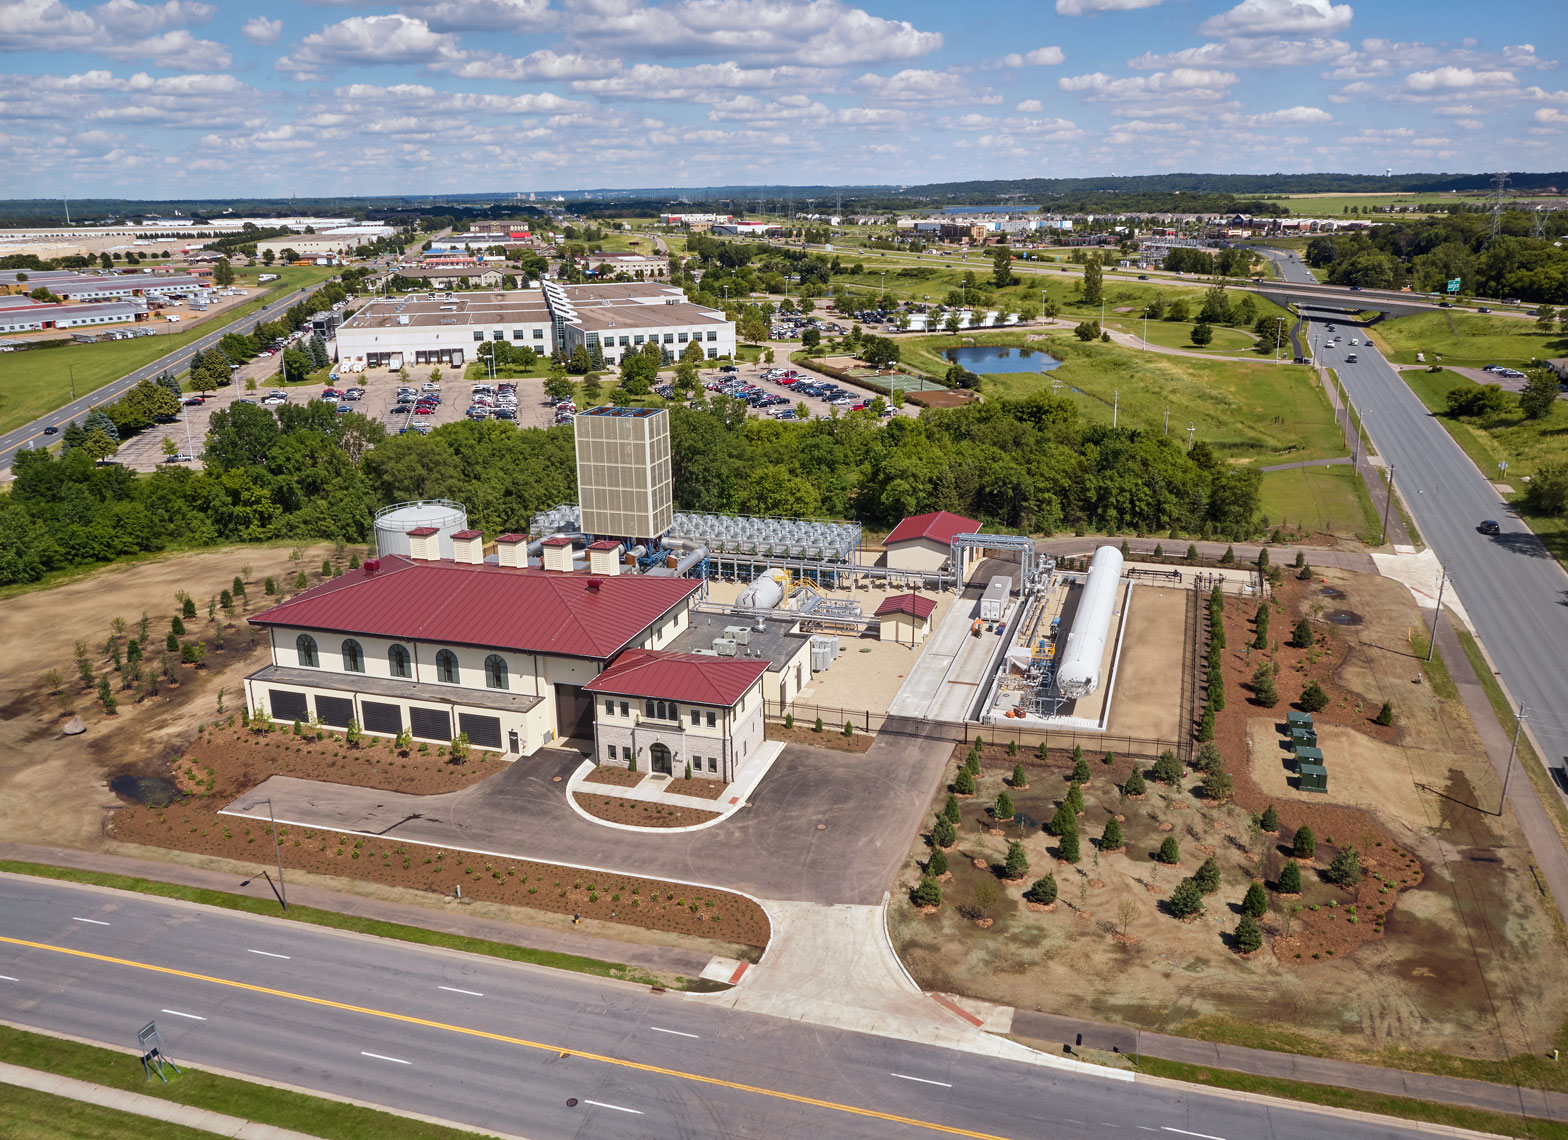 Avant energy plant/Shakopee, MN/new/arial drone photography